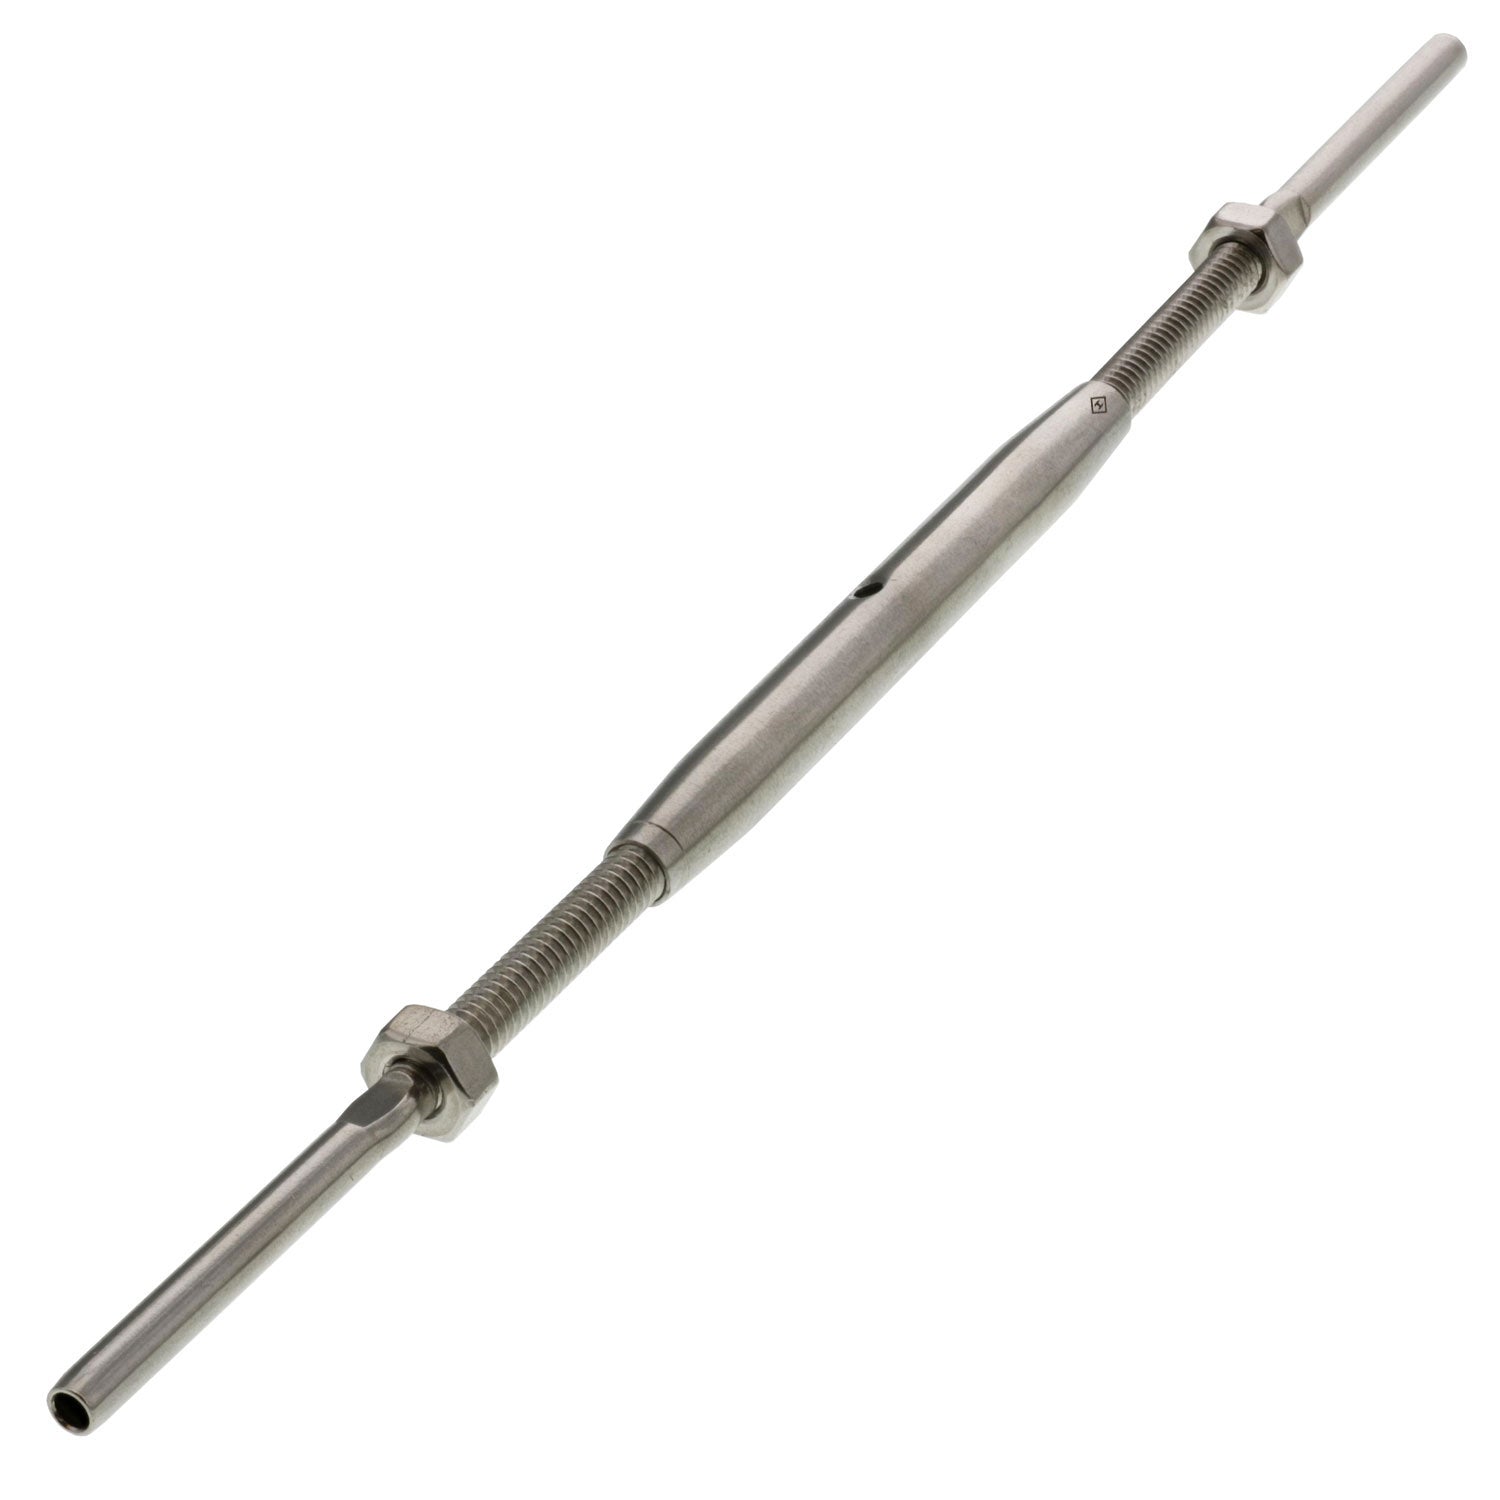 S0782-0703 316 STAINLESS STEEL TOGGLE & SWAGE TURNBUCKLE 1/4"-1/8"